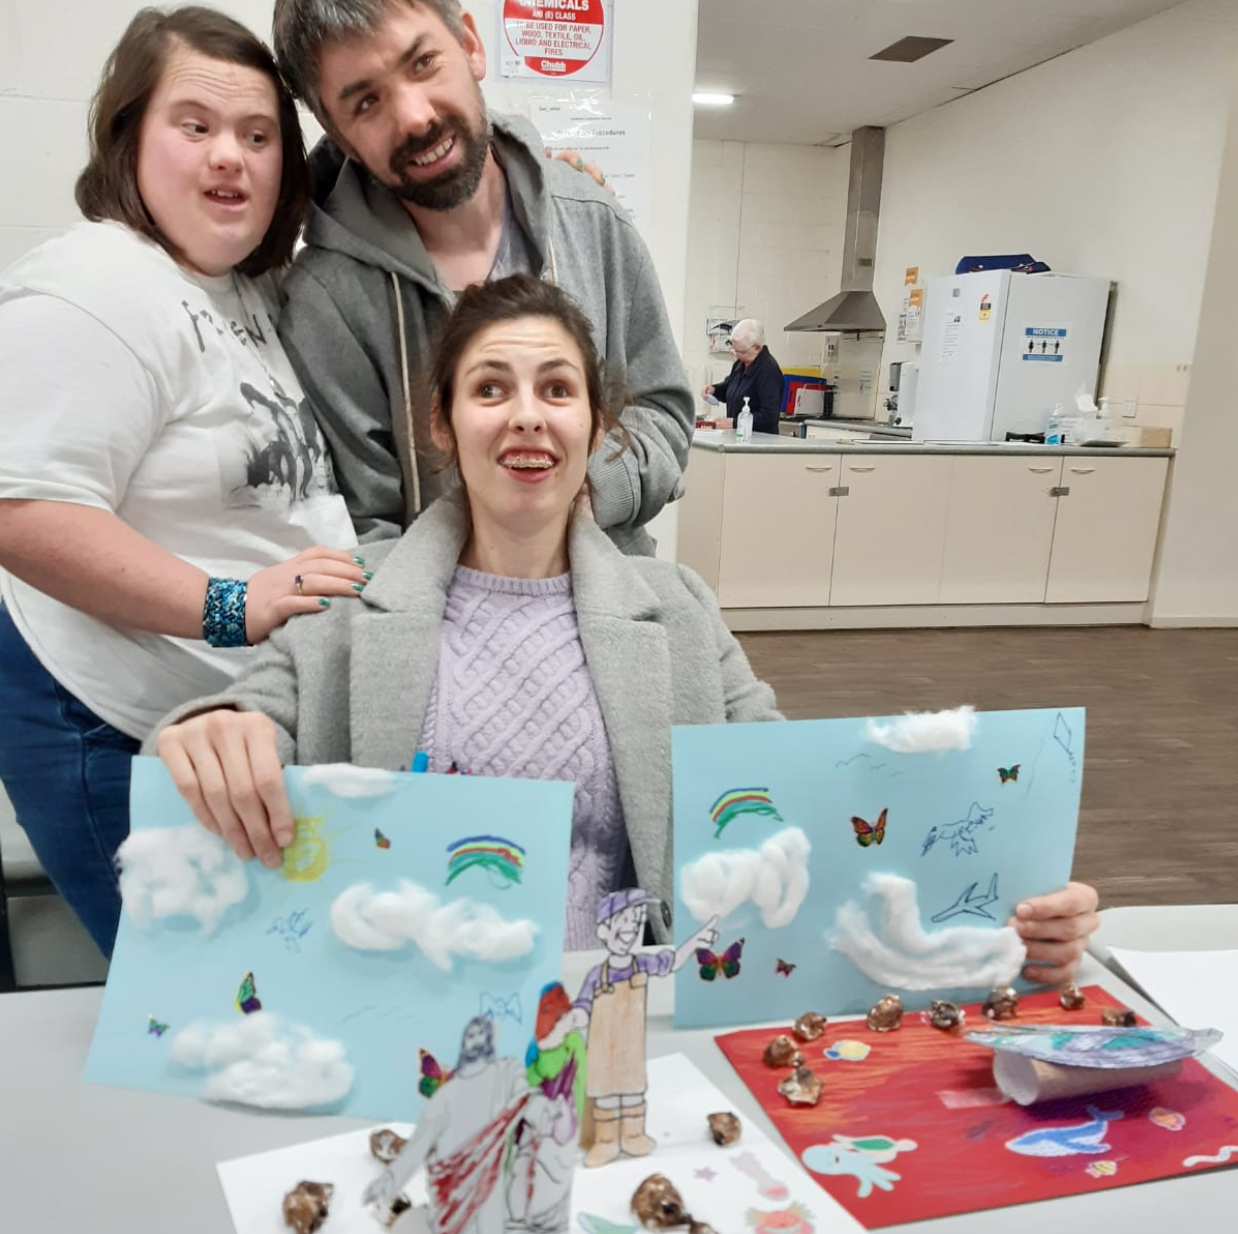 Jesus Club Albury - a program for adults with intellectual disabilities. Picture shows Jesus Club Albury members looking so proud with their completed craft.